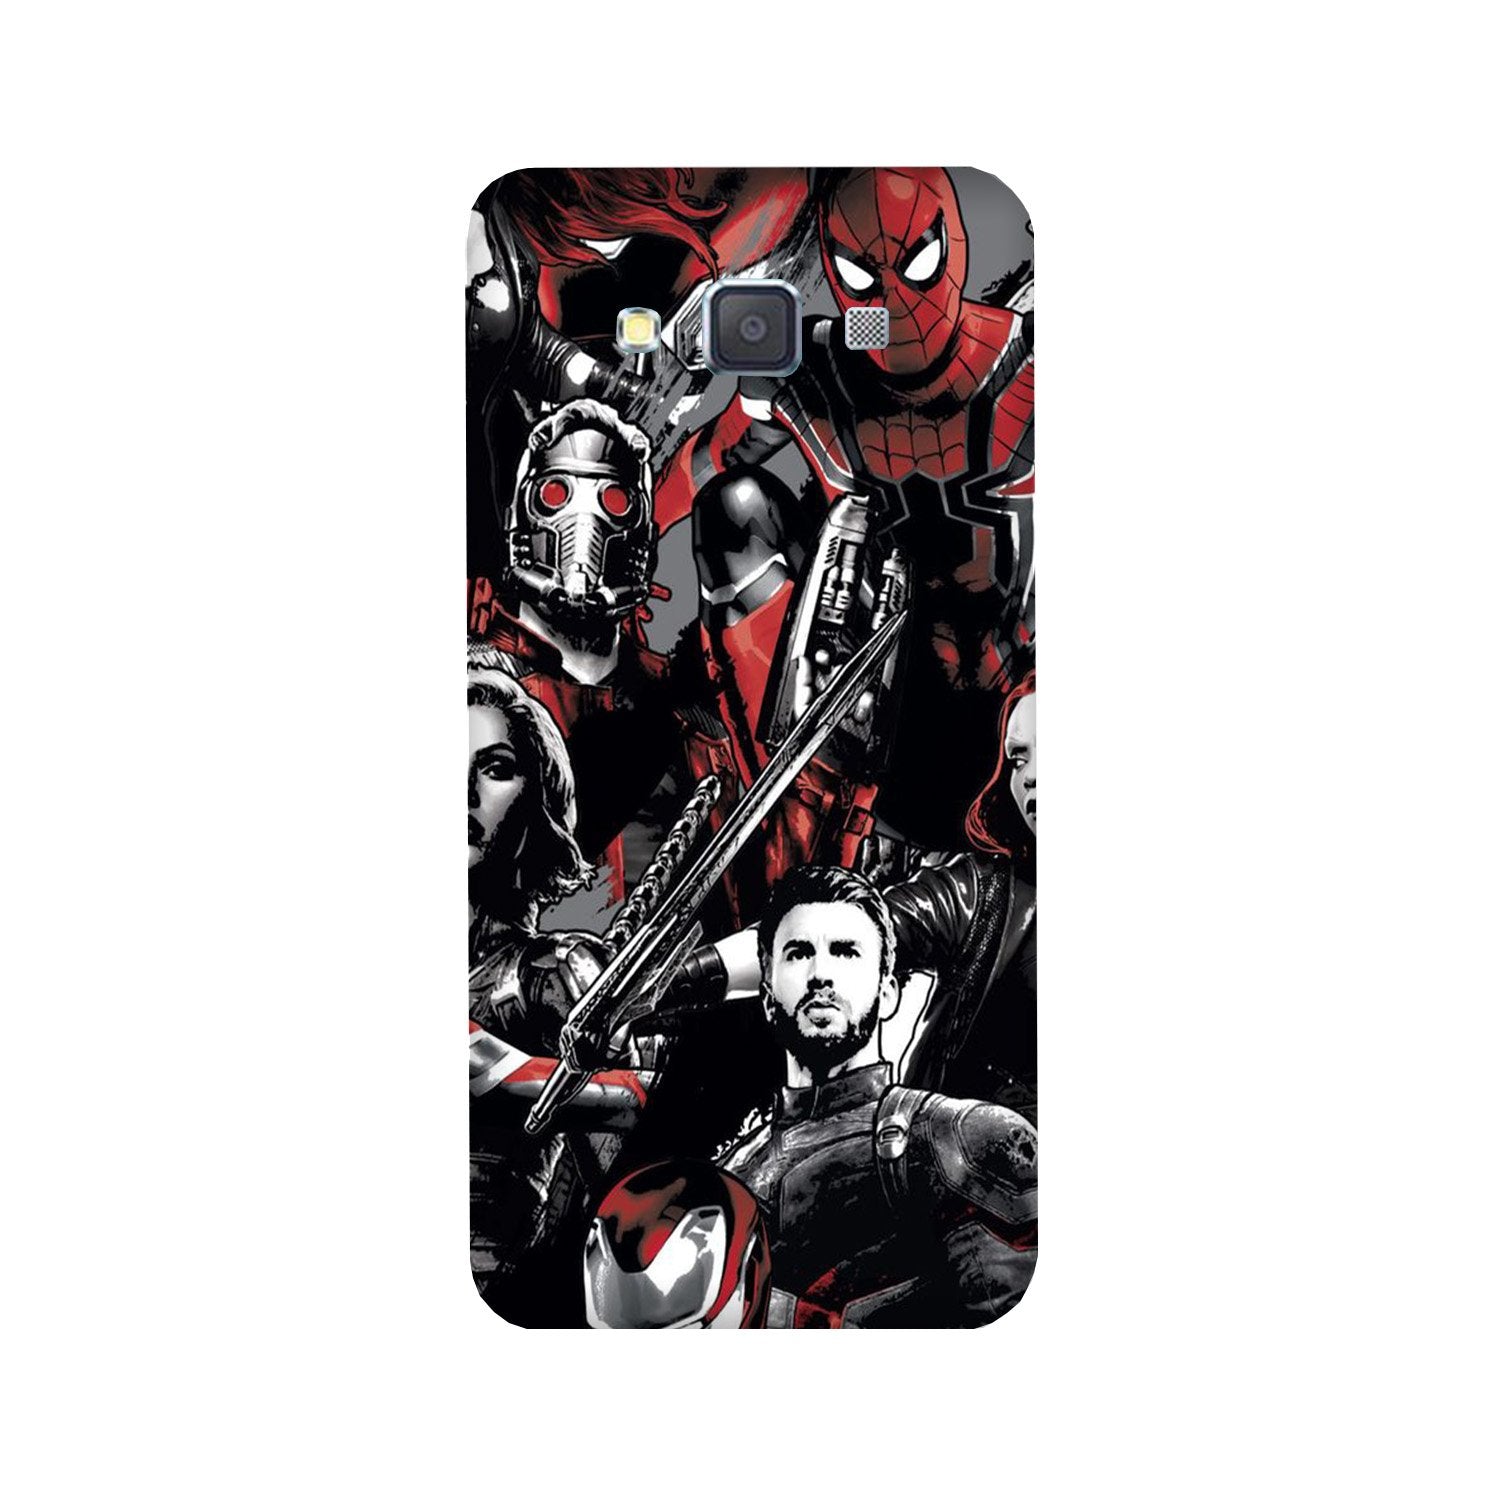 Avengers Case for Galaxy Grand 2 (Design - 190)